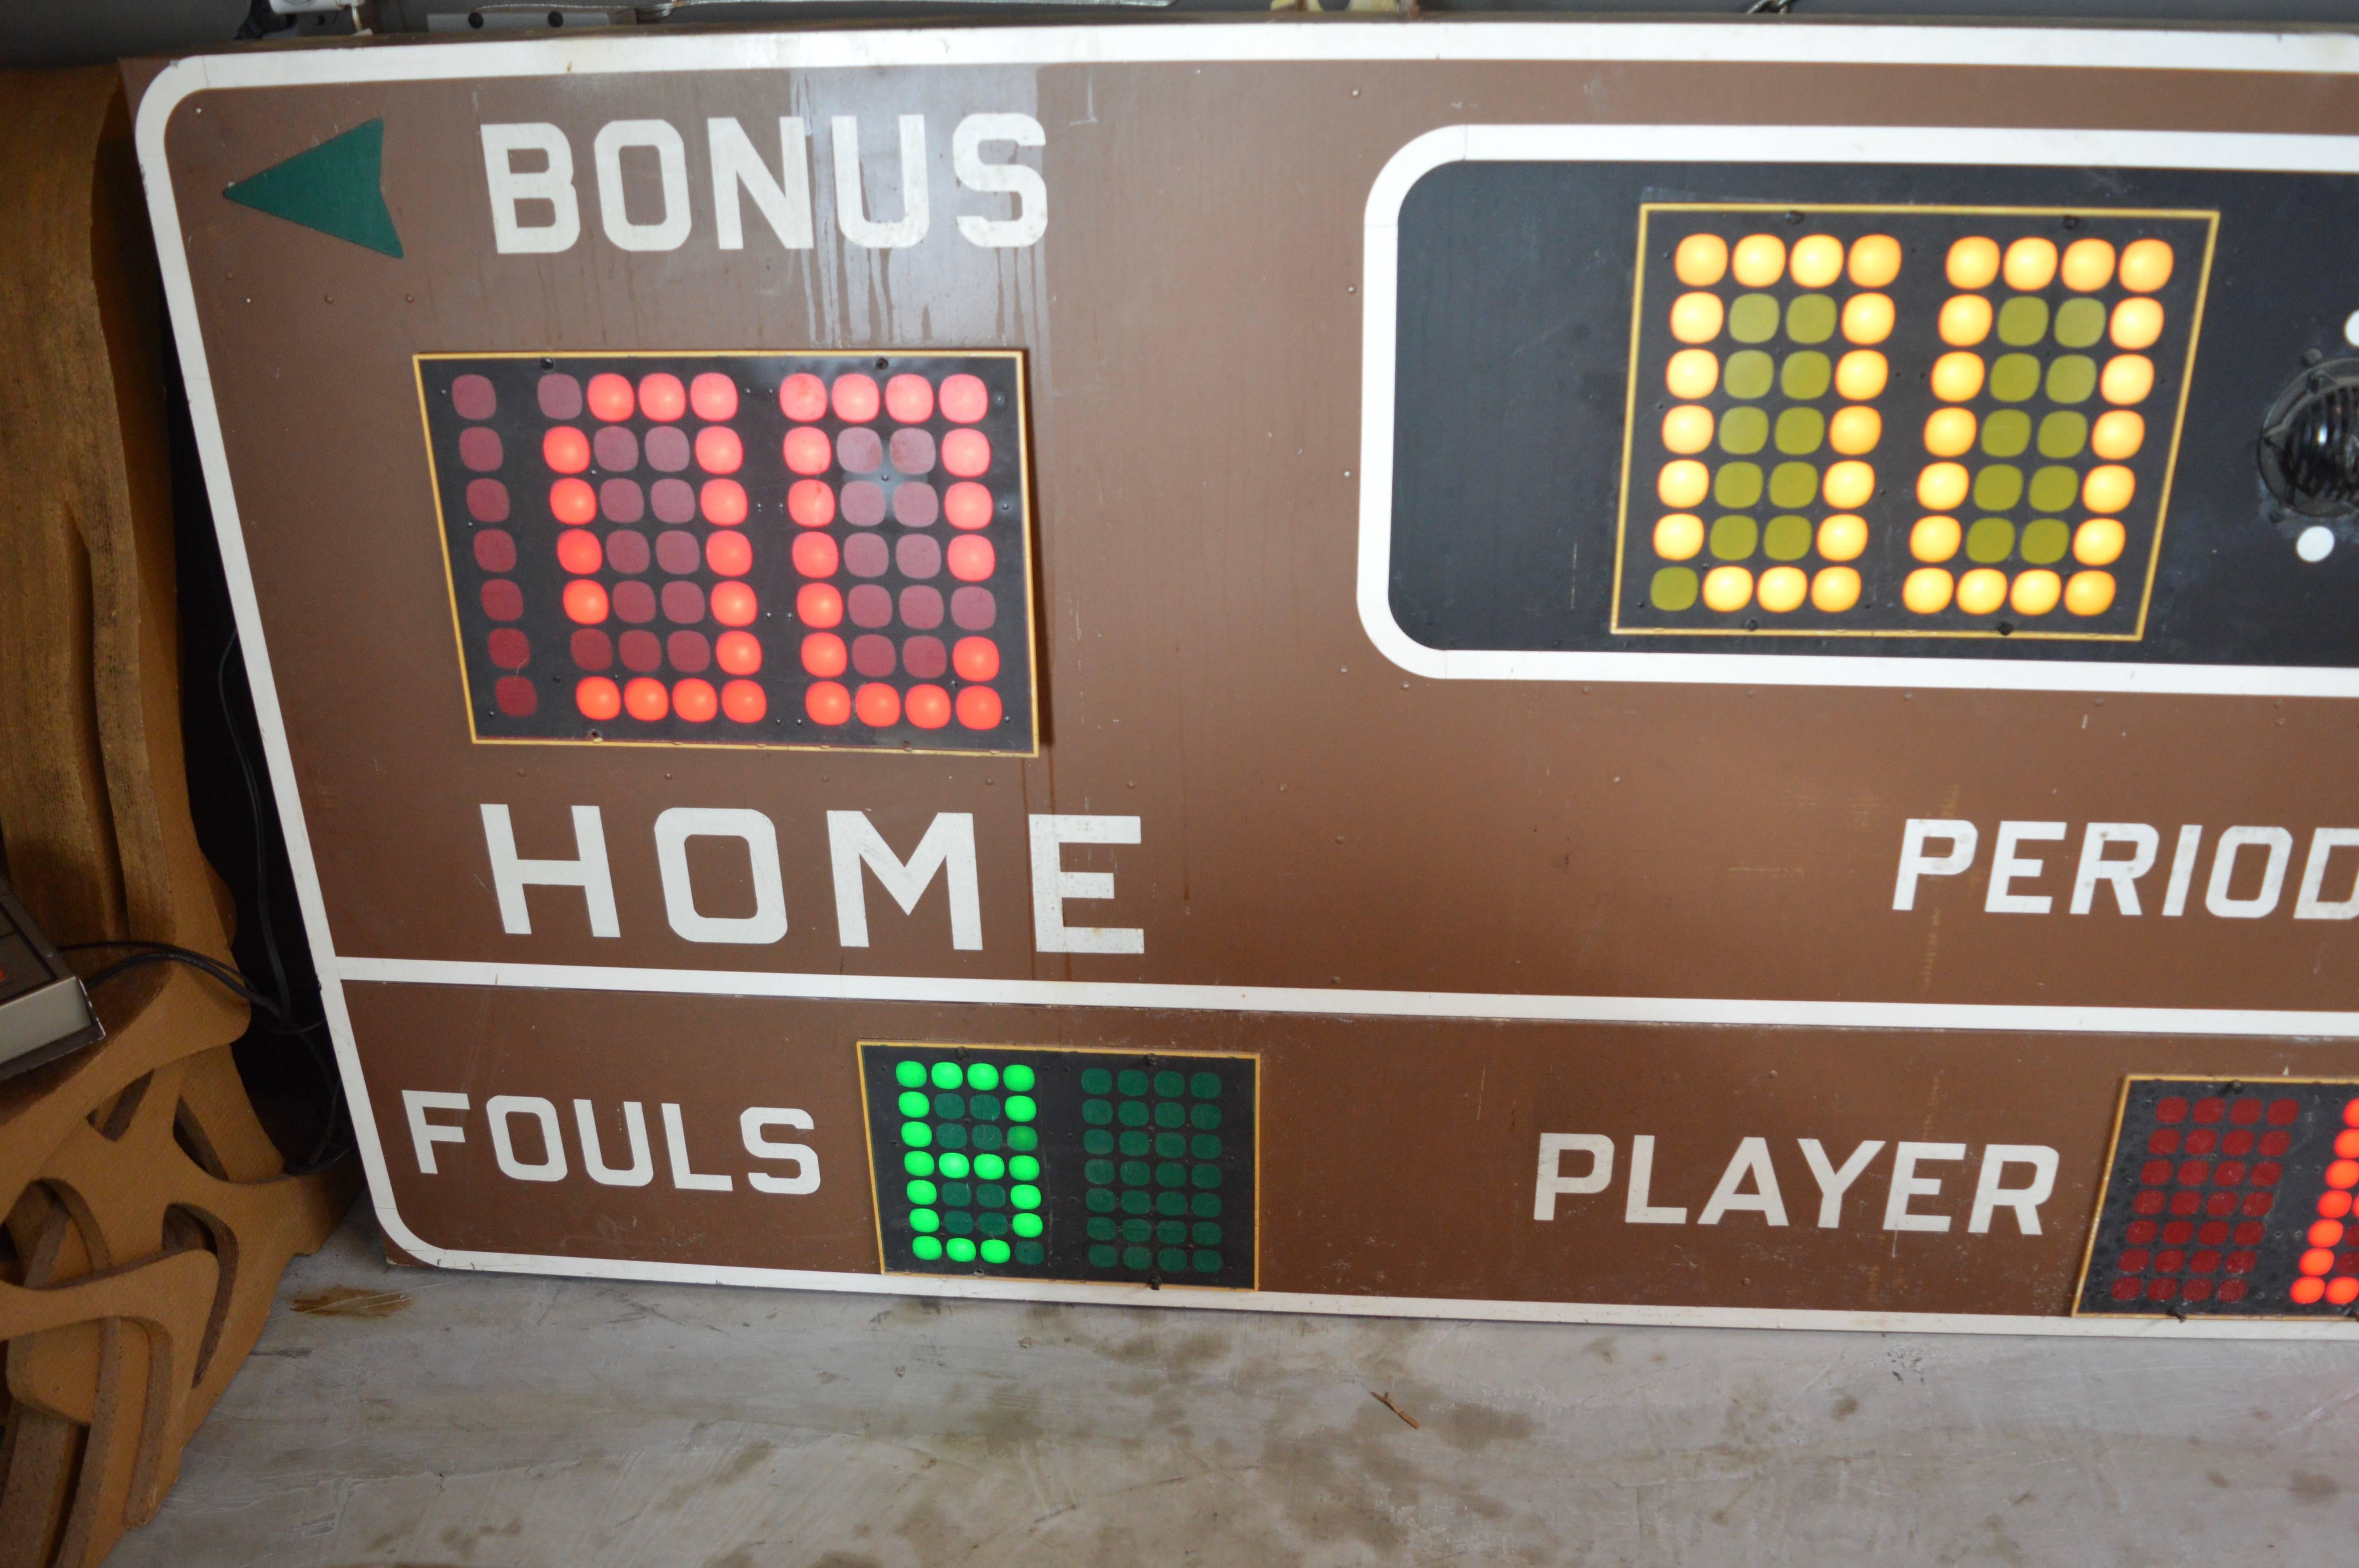 Massive 12 foot long vintage basketball scoreboard by Fair Play in the 1970s. In great working order with controller to adjust score, running shot clock etc. Working Horn. Very fun piece of art for your home or commercial space. Taken down from a